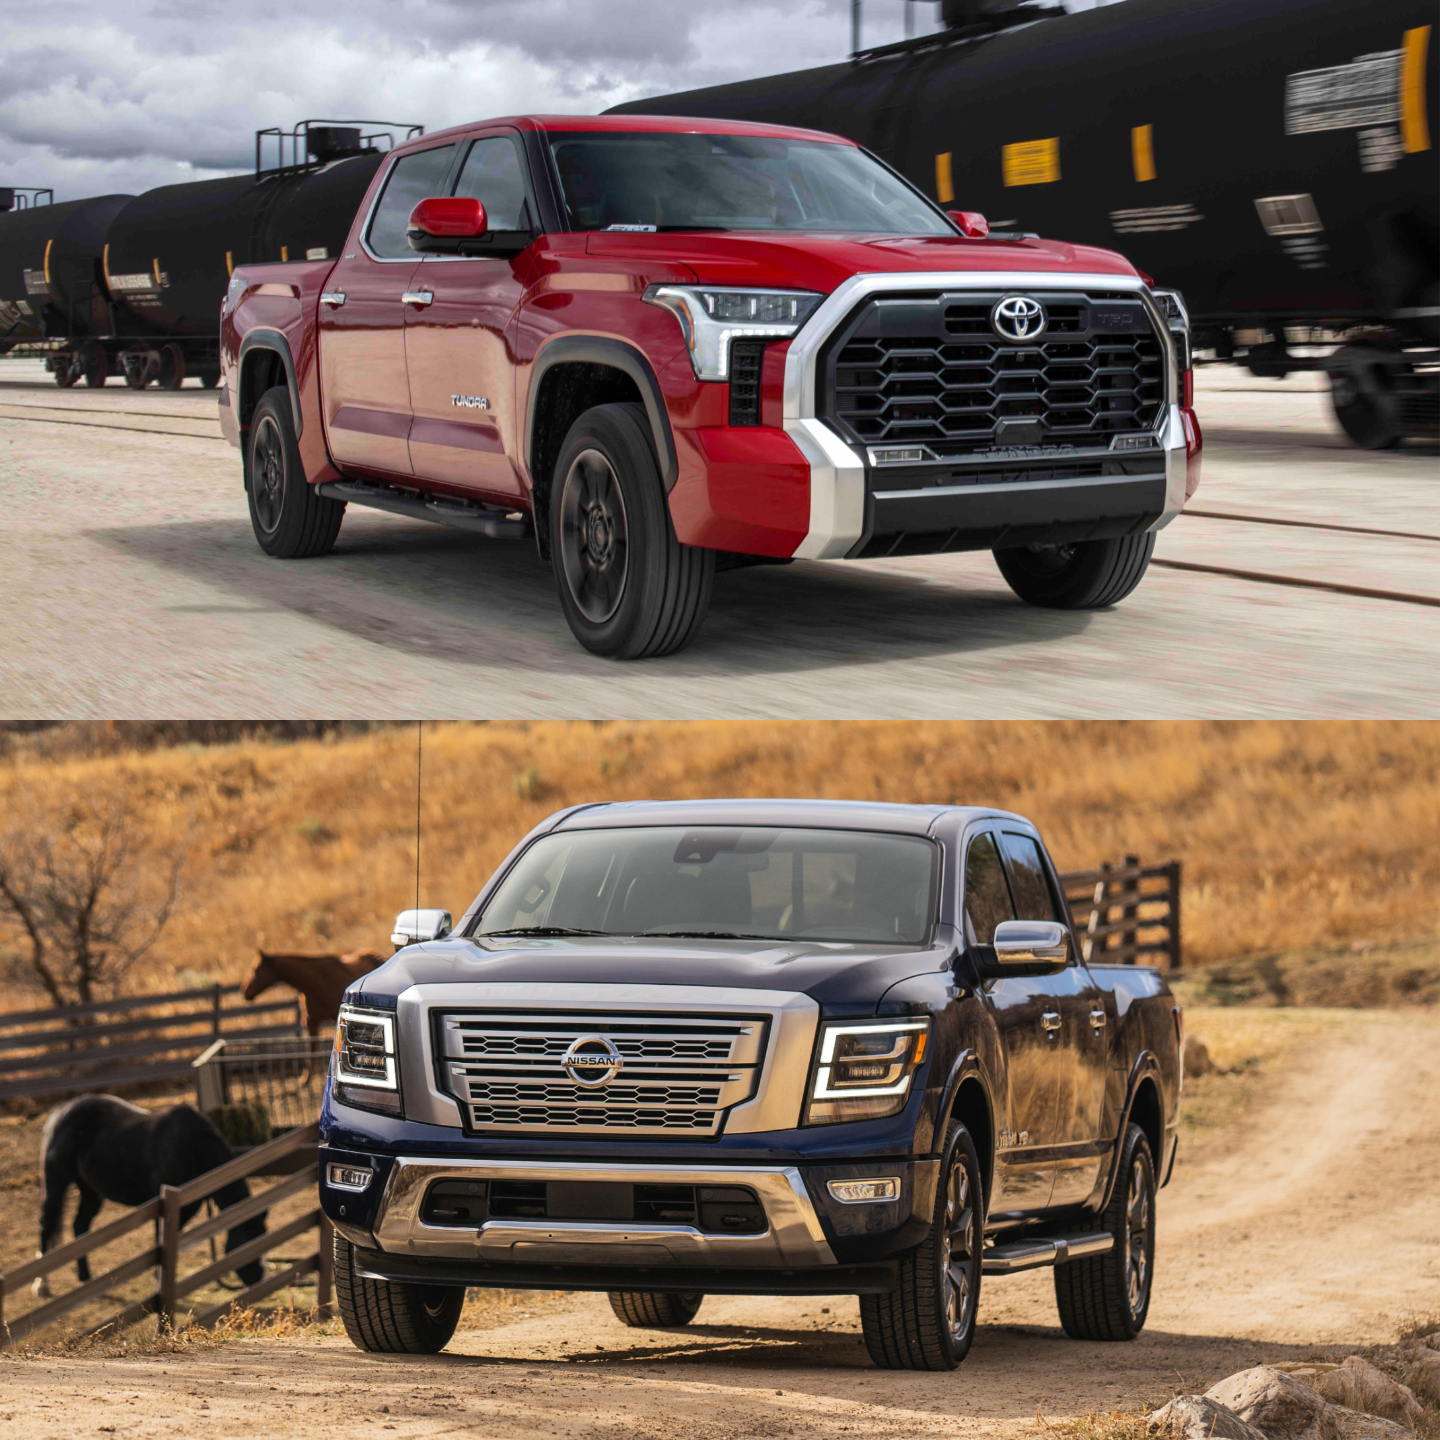 The Toyota Tundra and the Nissan Titan pickup trucks on the road